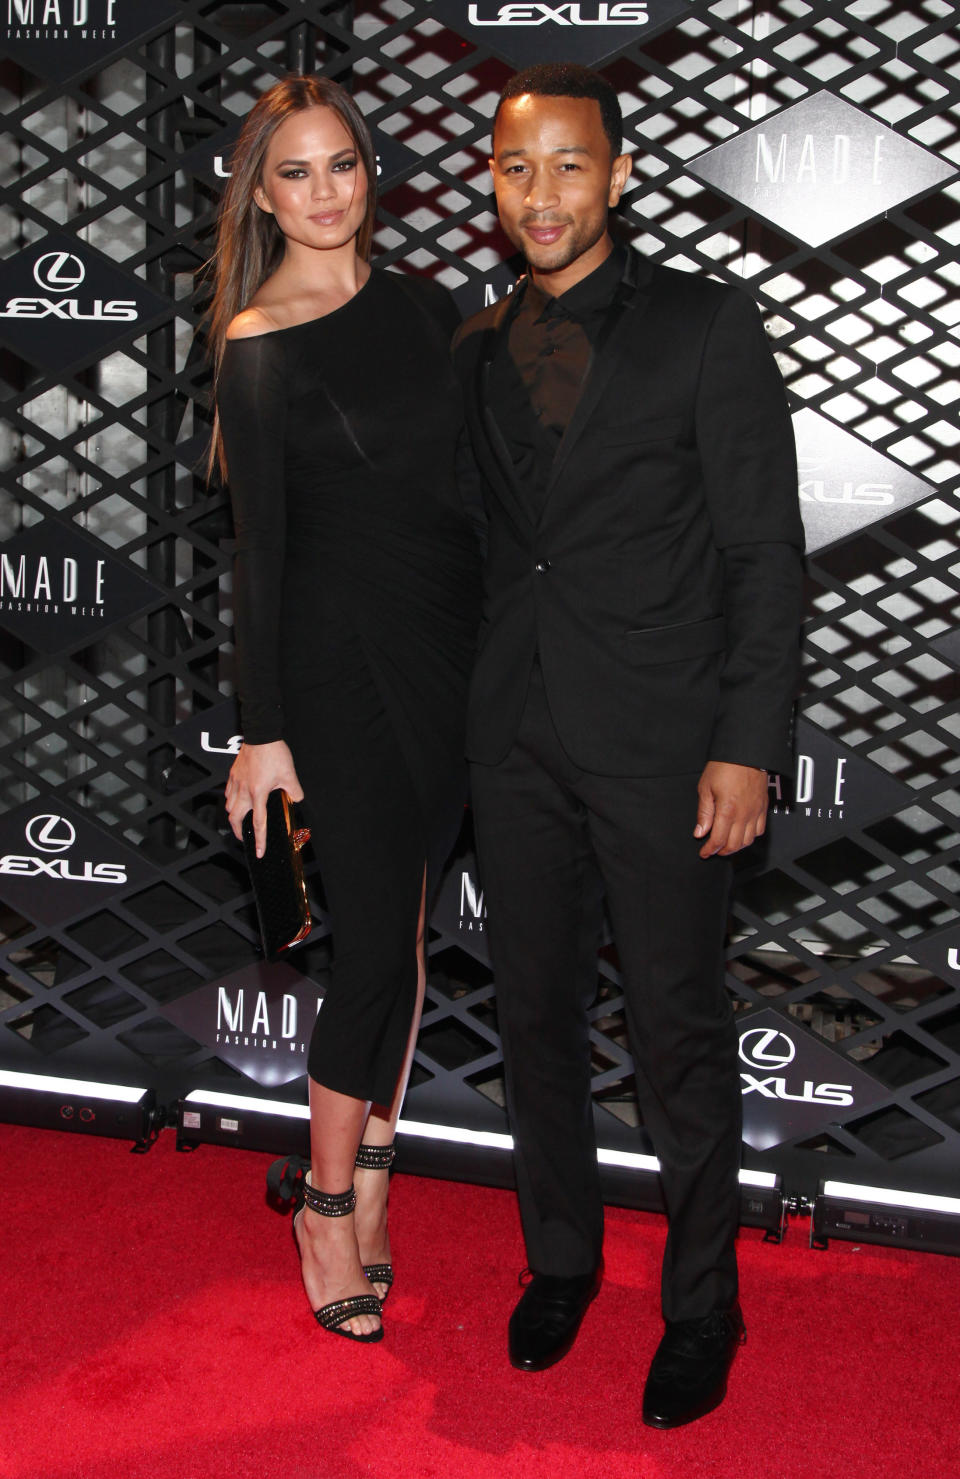 NEW YORK, NY - SEPTEMBER 05: Christine Teigen and John Legend attend the Lexus Design Disrupted Fashion Event at SIR Stage 37 on September 5, 2013 in New York City. (Photo by Taylor Hill/Getty Images)